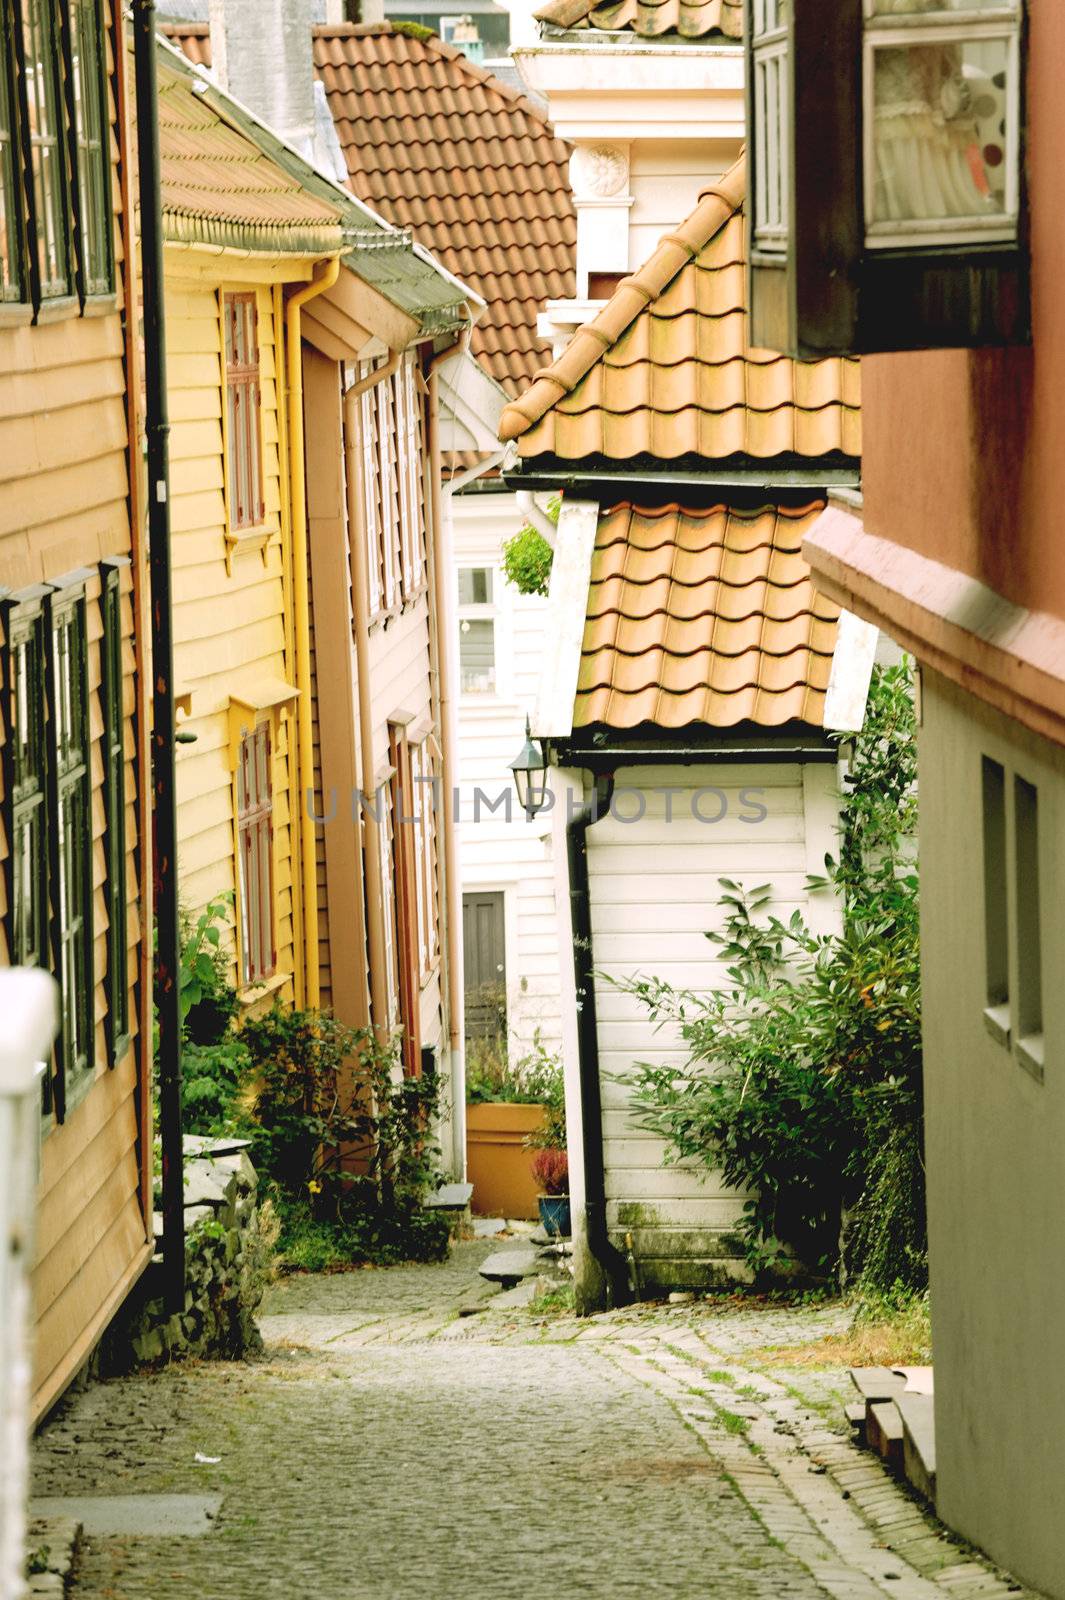 View on the old street in Bergen, Norway